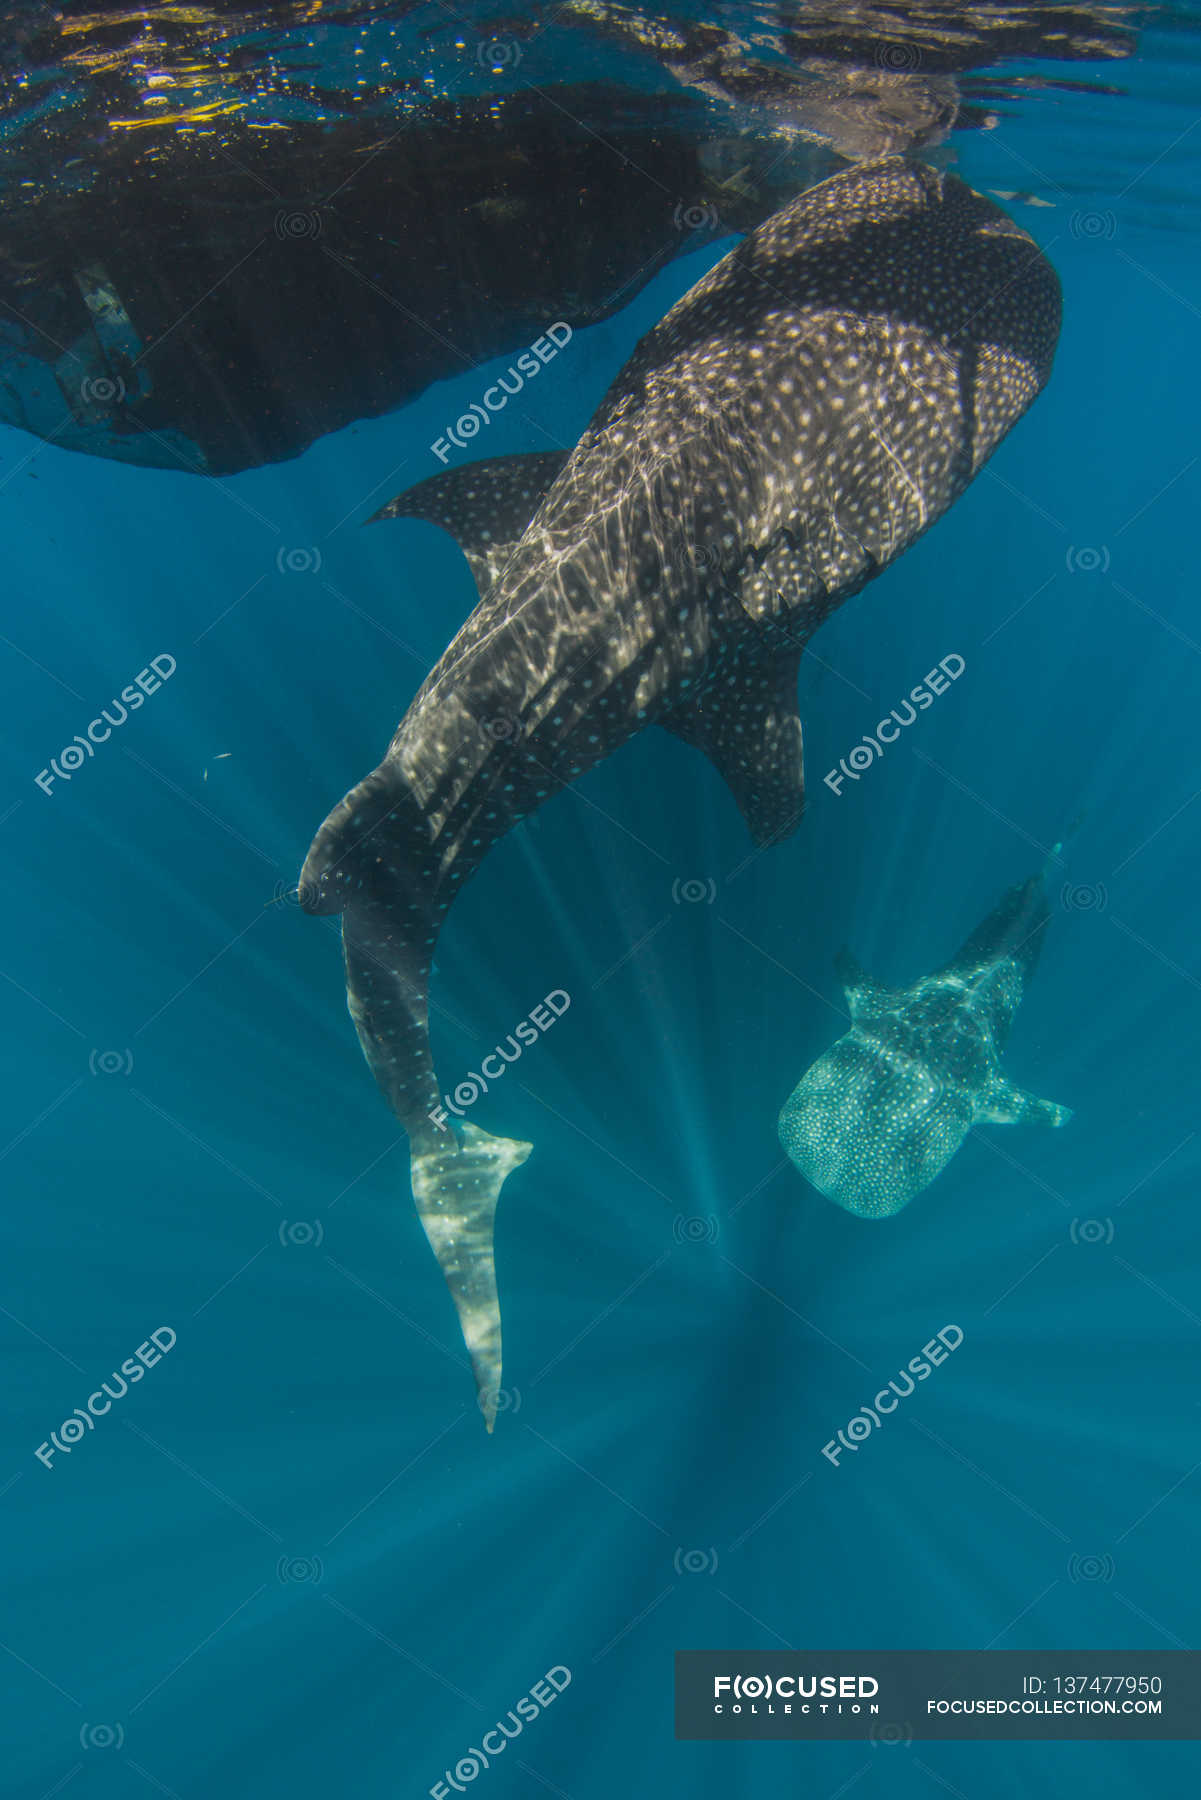 whale shark eating fish from net